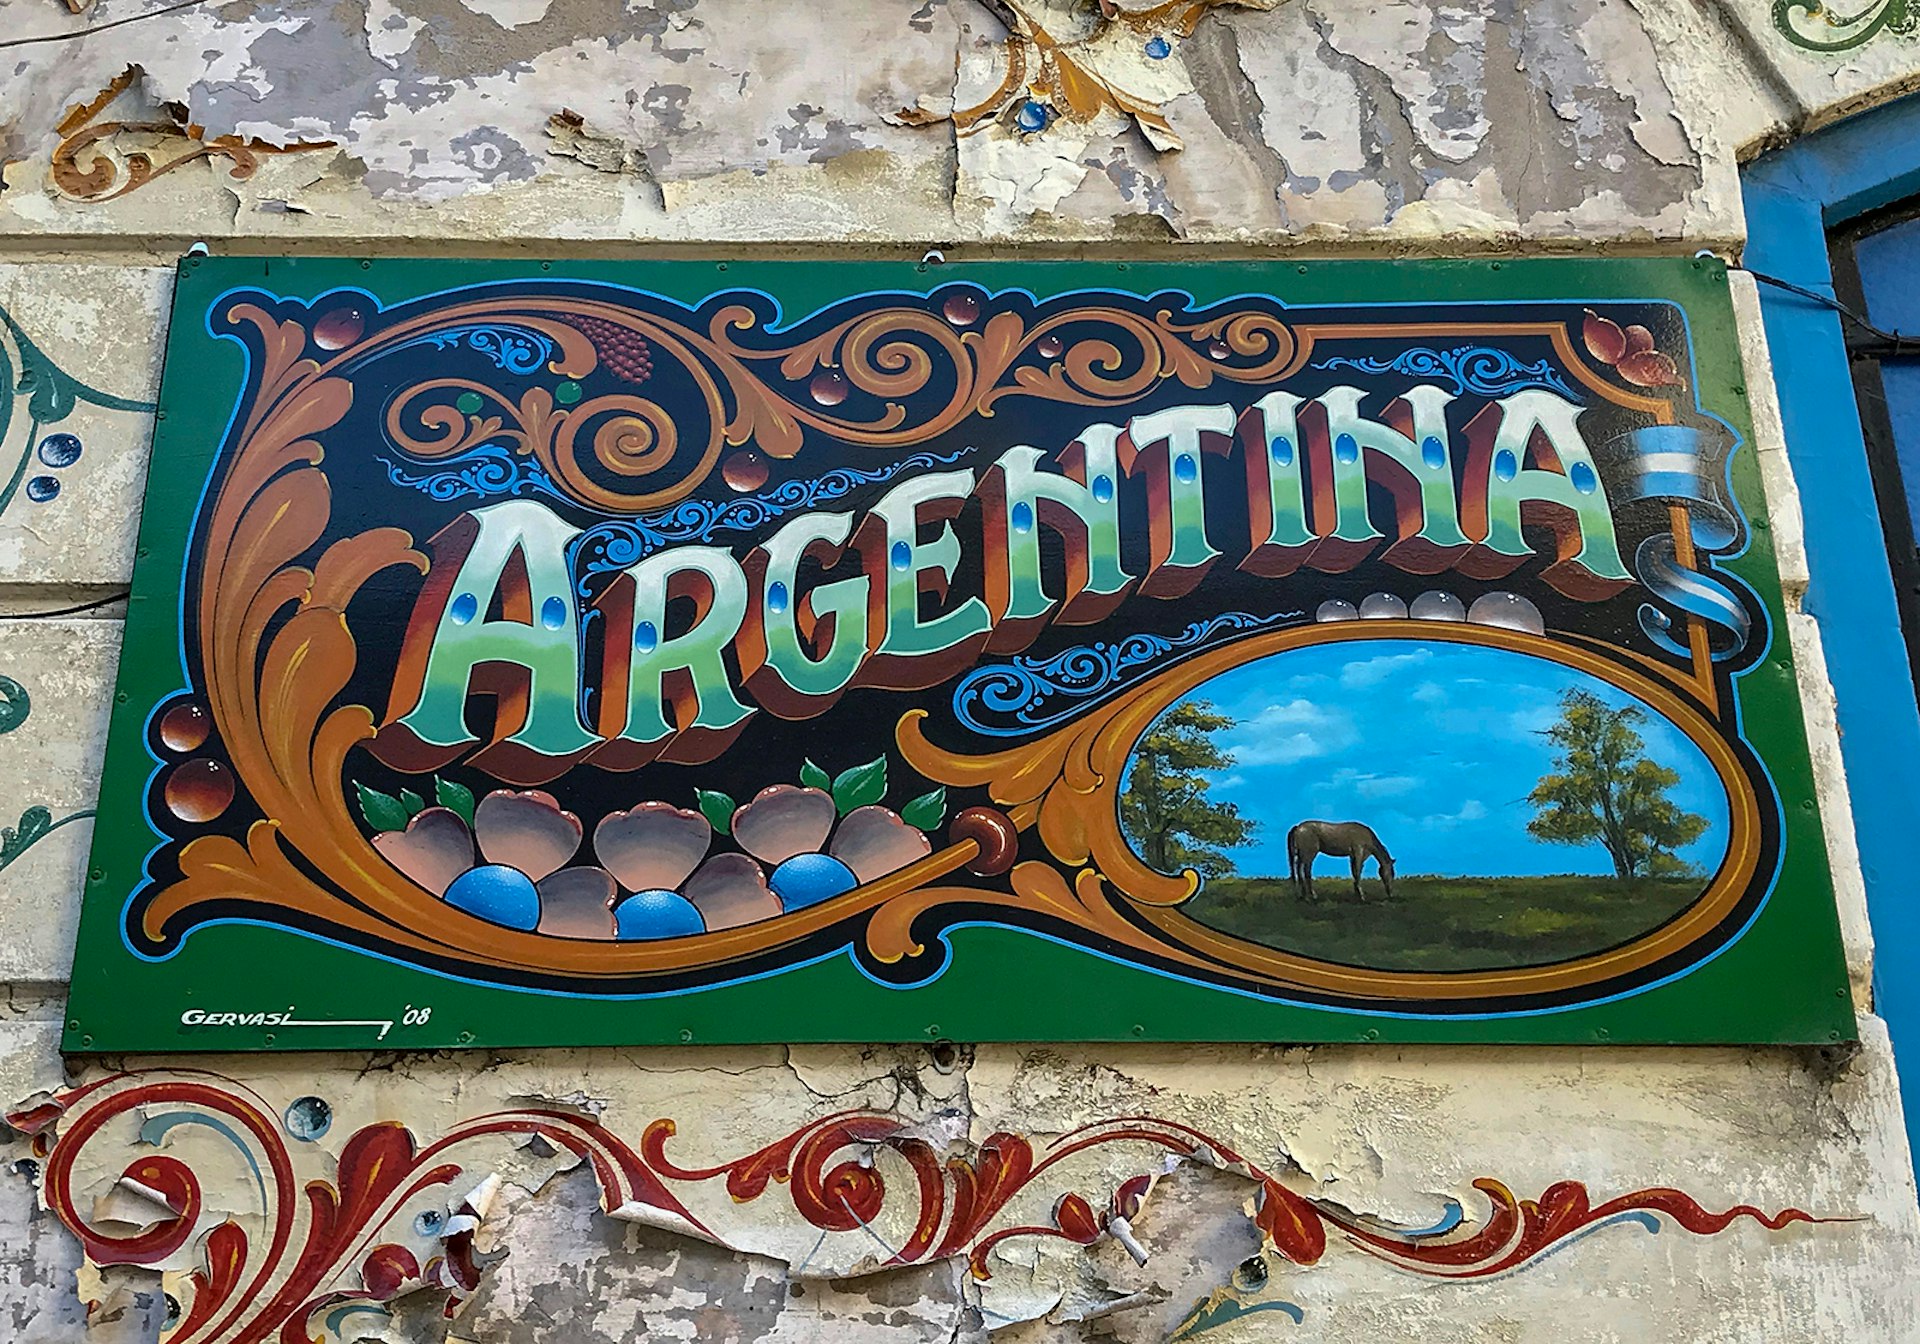 An image of a sign that reads "Argentina" in decorative lettering against a green background